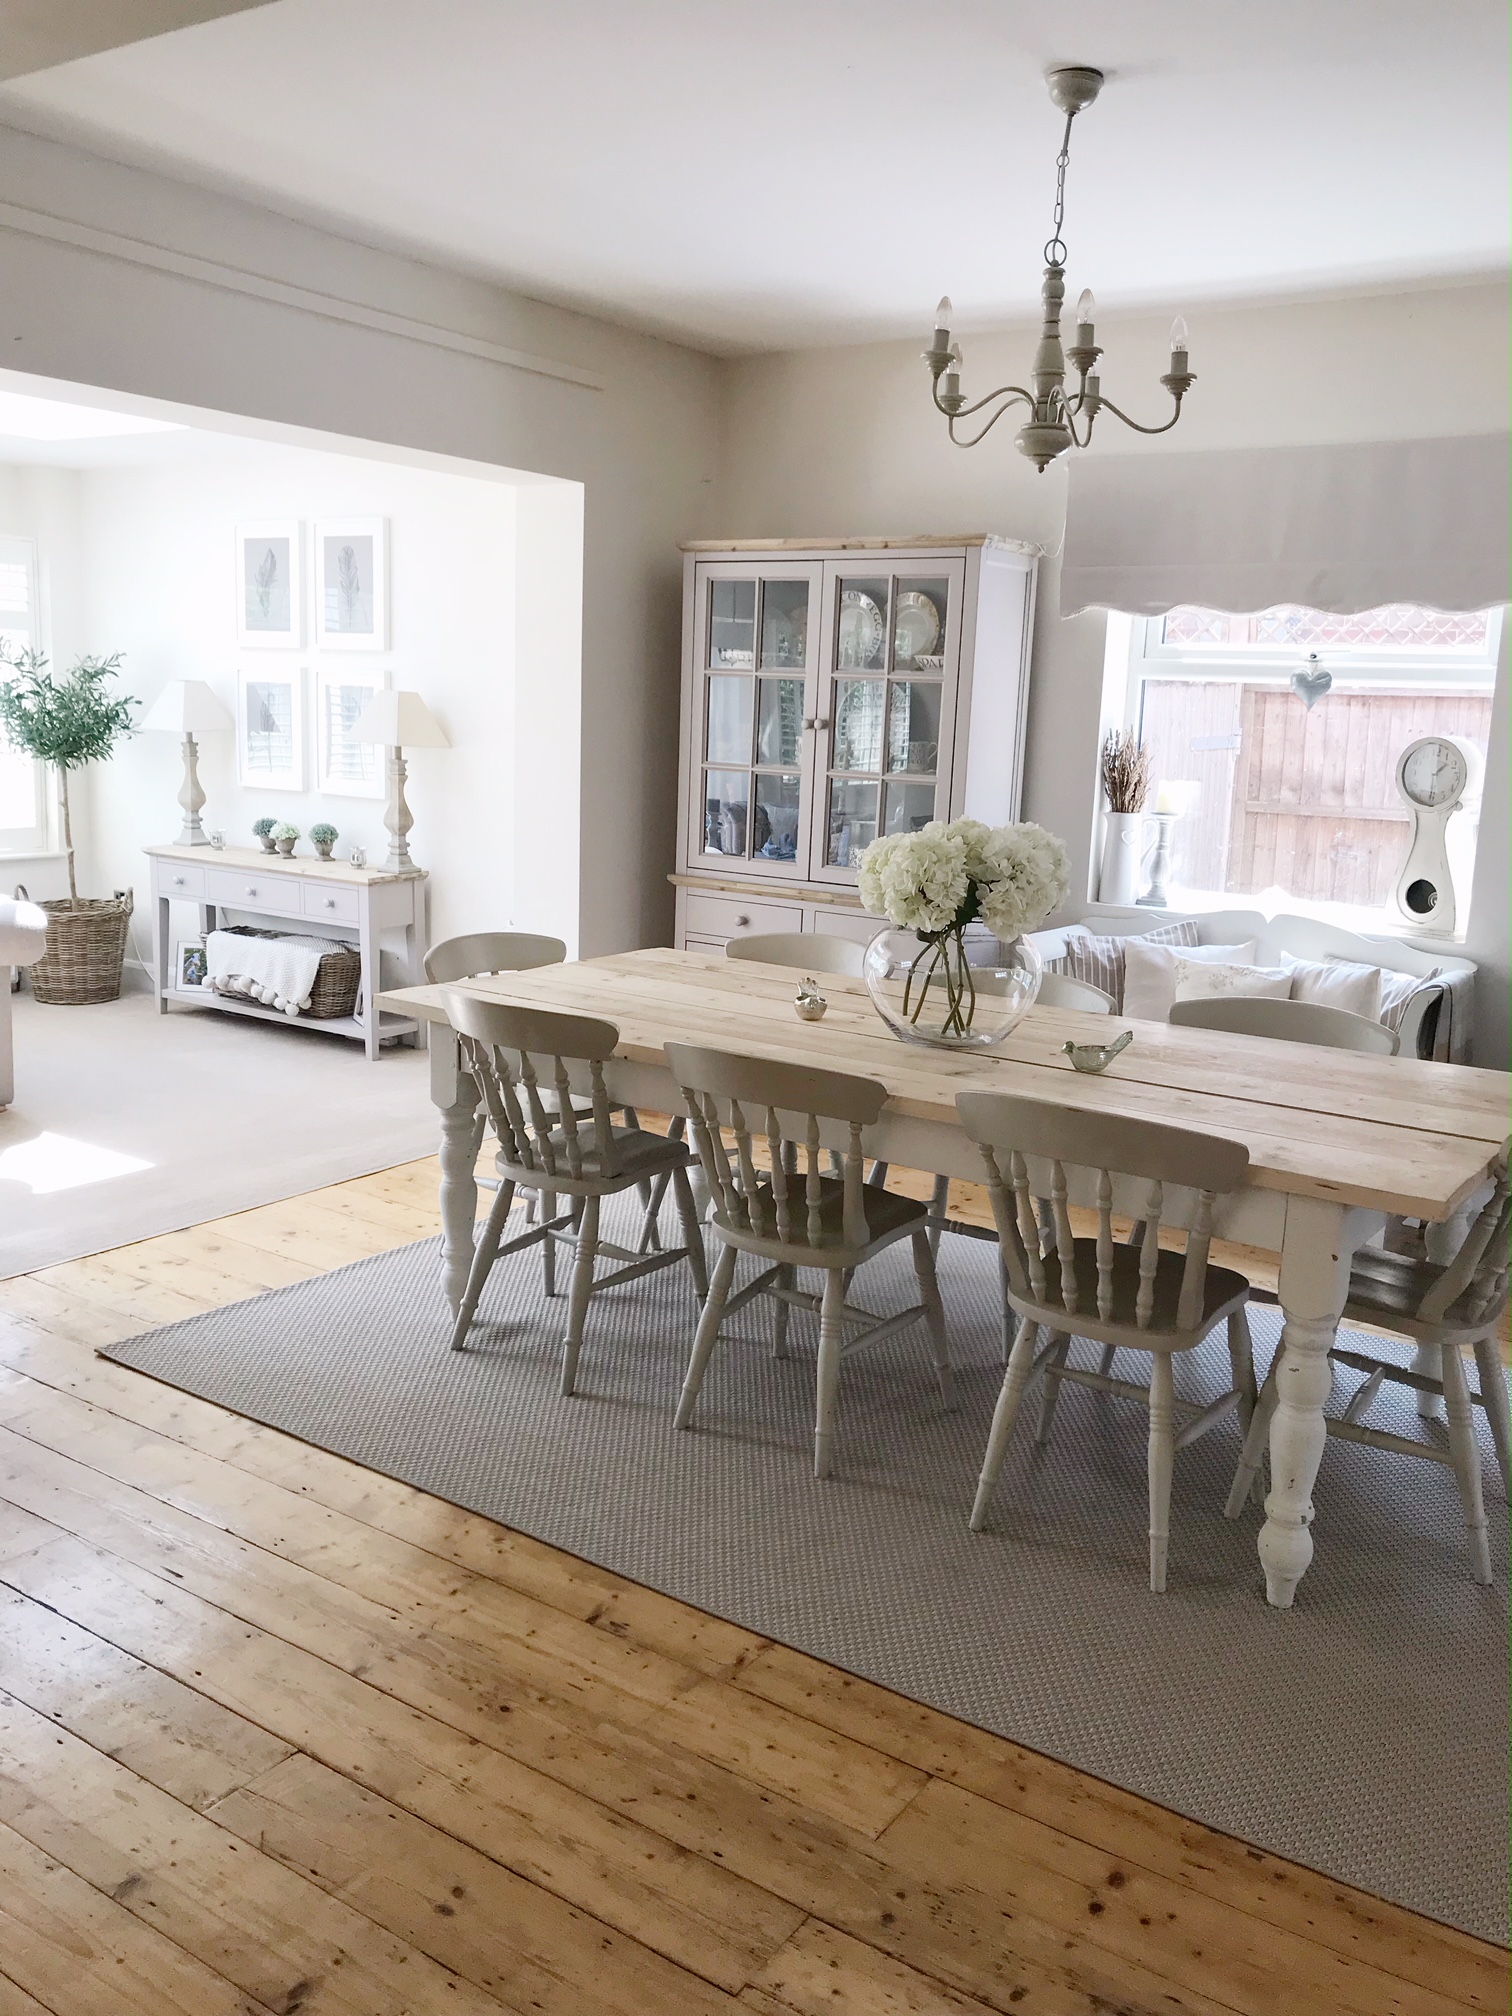 Home Tour Friday - Dining Room